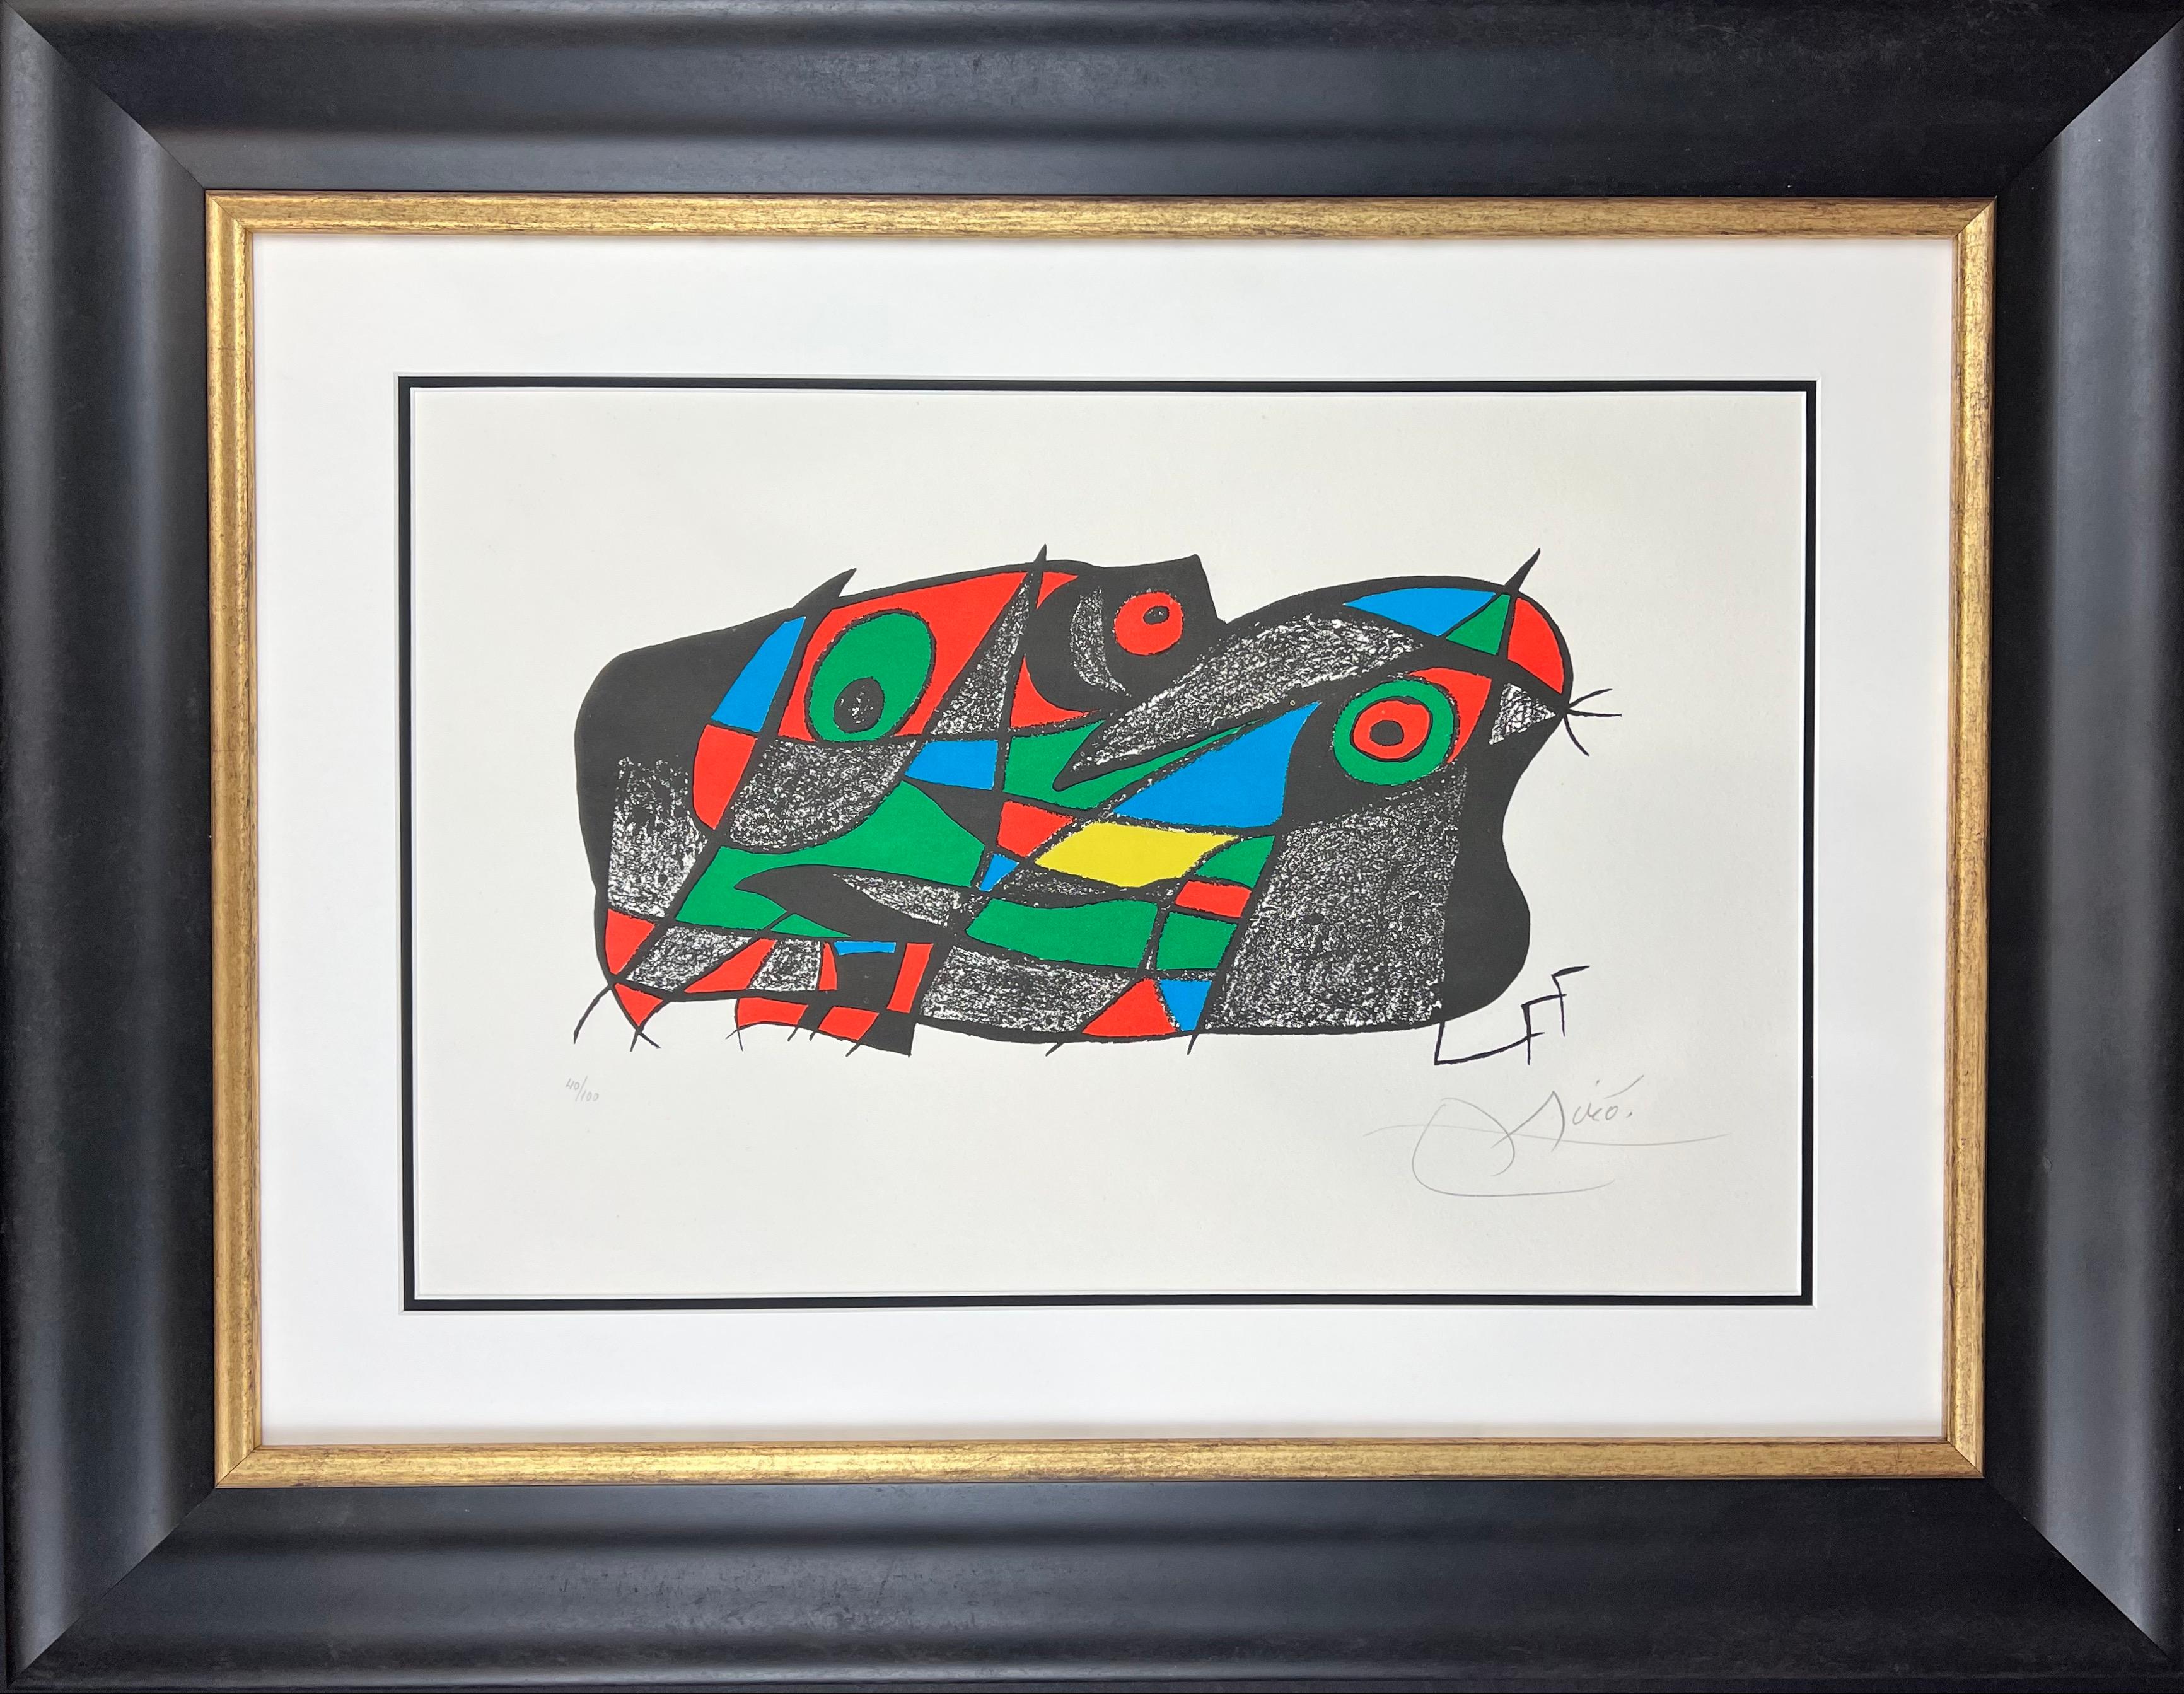 Color lithograph on paper , edited in 1974
Limited edition of 100 copies
signed in pencil by artist in lower right corner and numbered 40/100 in lower left corner
Framed size: 59 x 76,5 cm
Paper size: 35 x 52 cm
excellent conditions , with strong